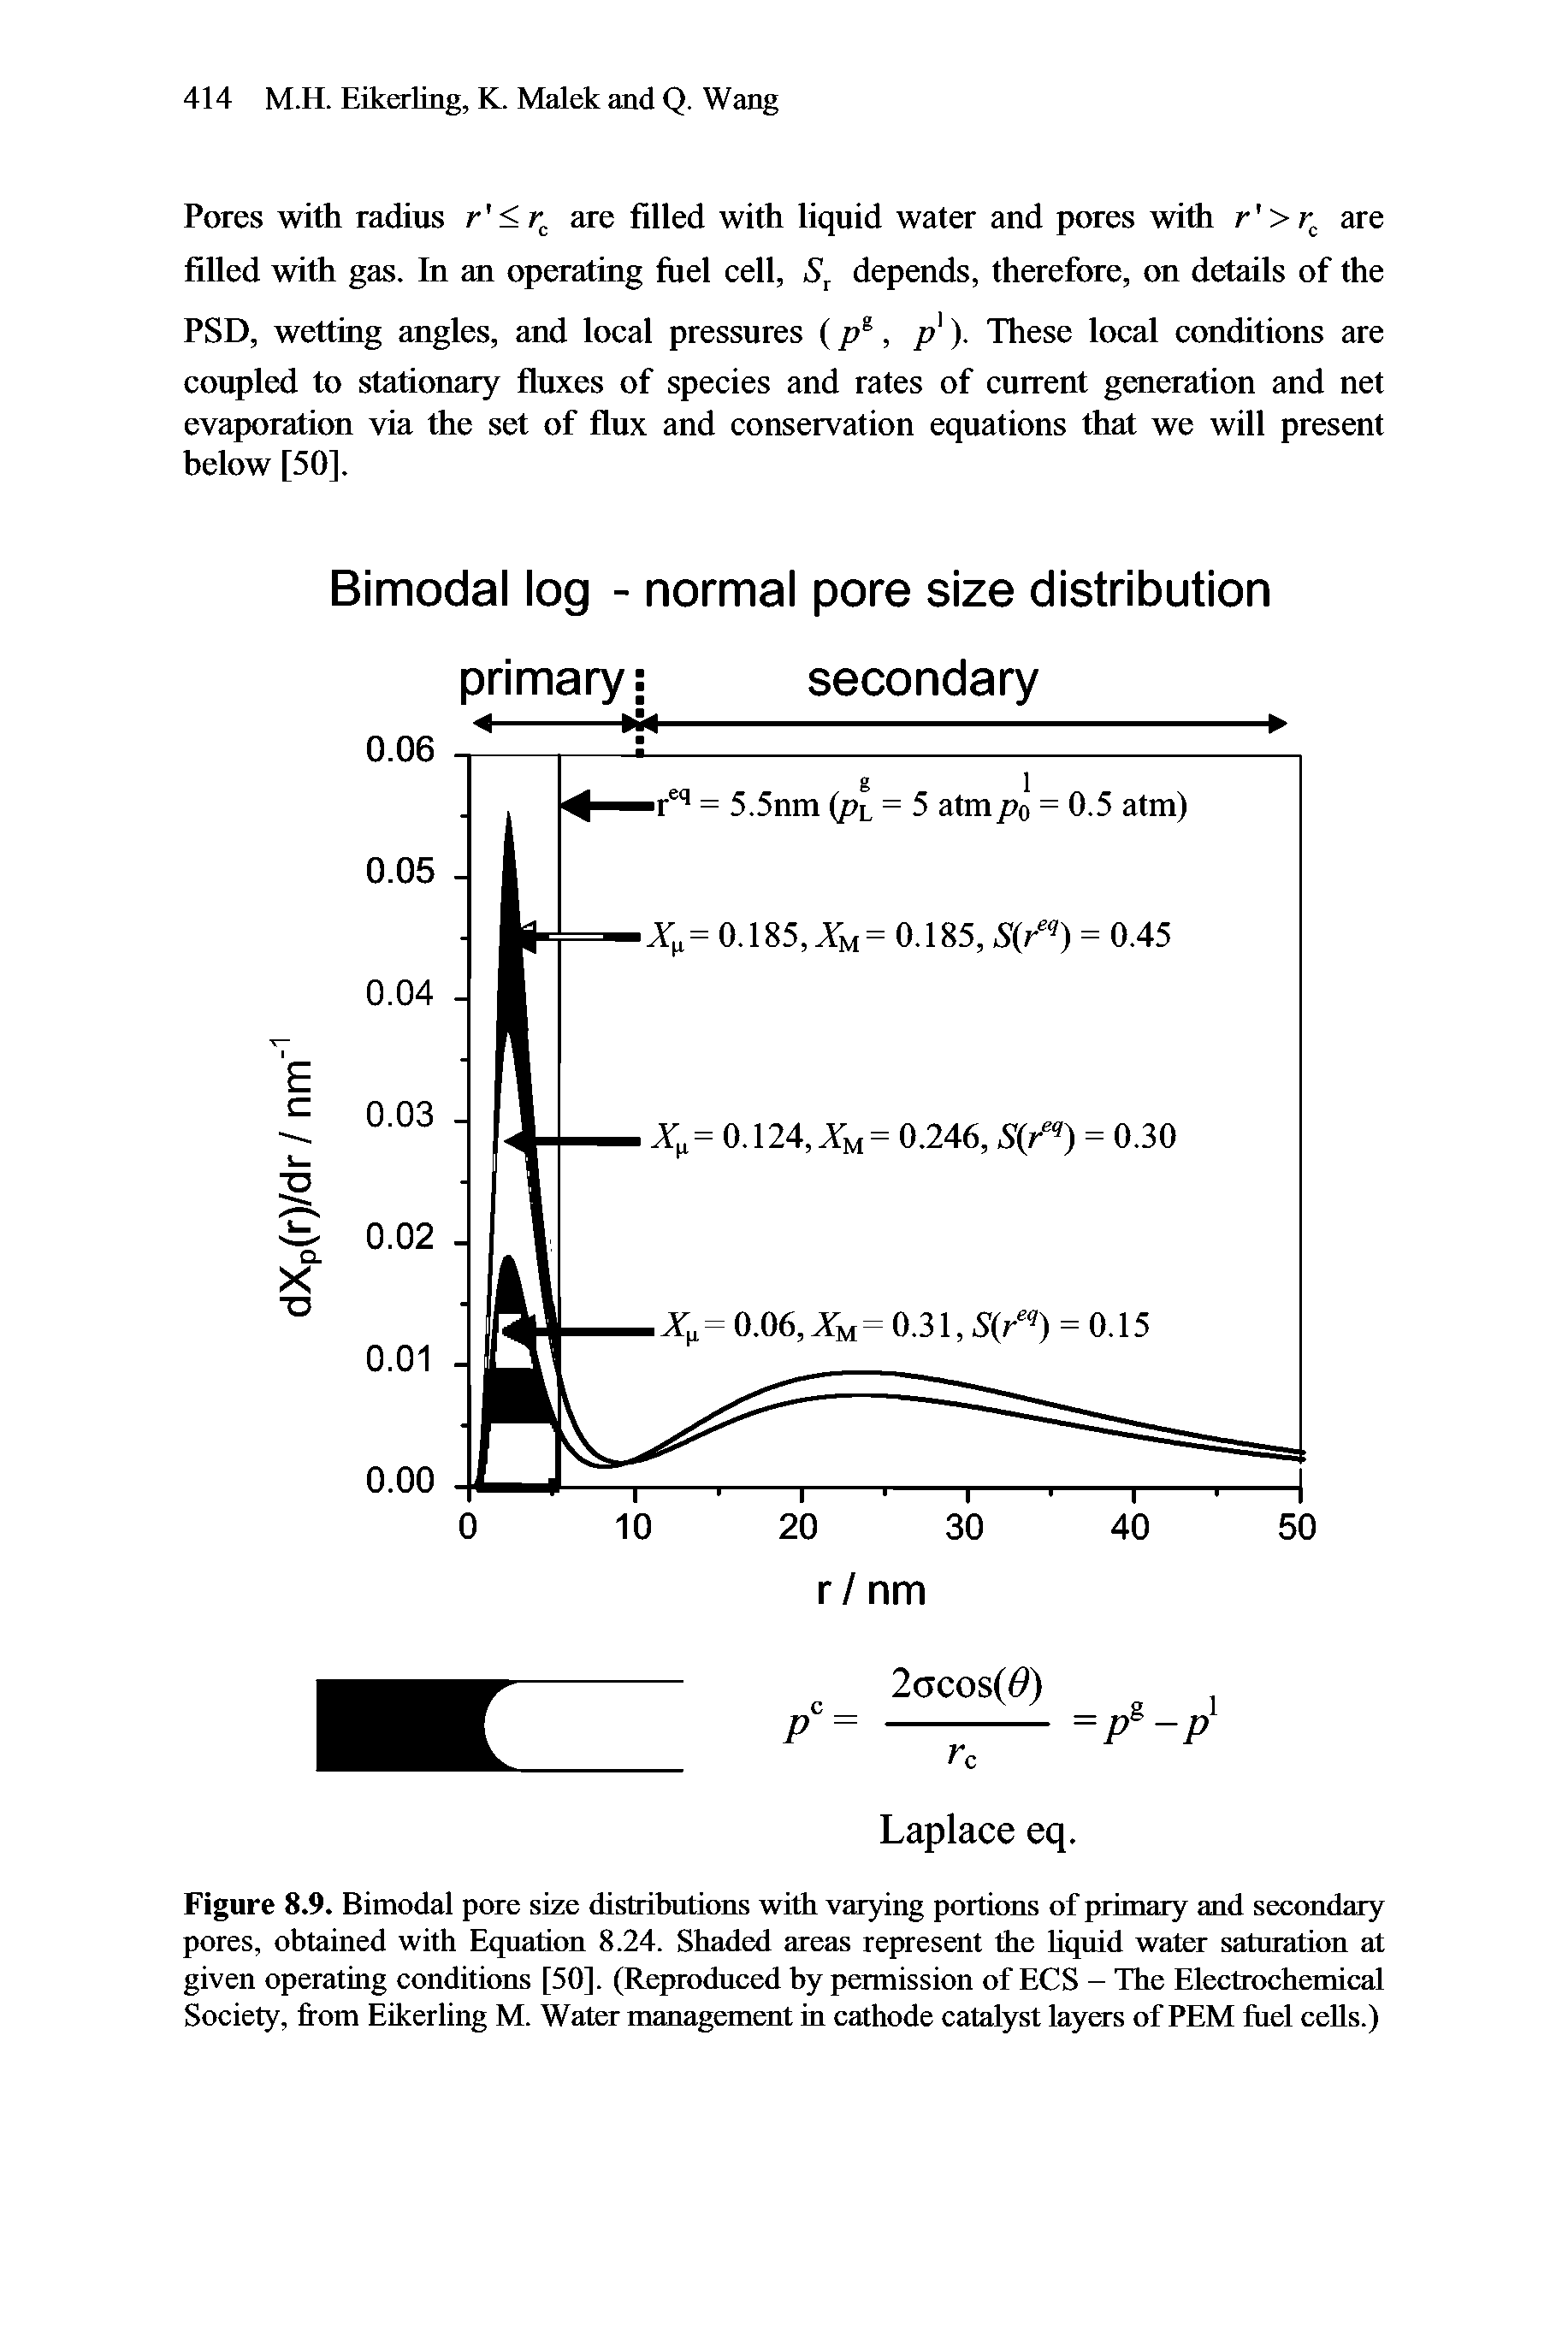 Figure 8.9. Bimodal pore size distributions with varying portions of primary and seeondary pores, obtained with Equation 8.24. Shaded areas represent the Uquid water saturation at given operating conditions [50]. (Reprodueed by permission of ECS - The Eleetroehemieal Society, from Eikerling M. Water management in eathode catalyst layers of PEM fuel eeUs.)...